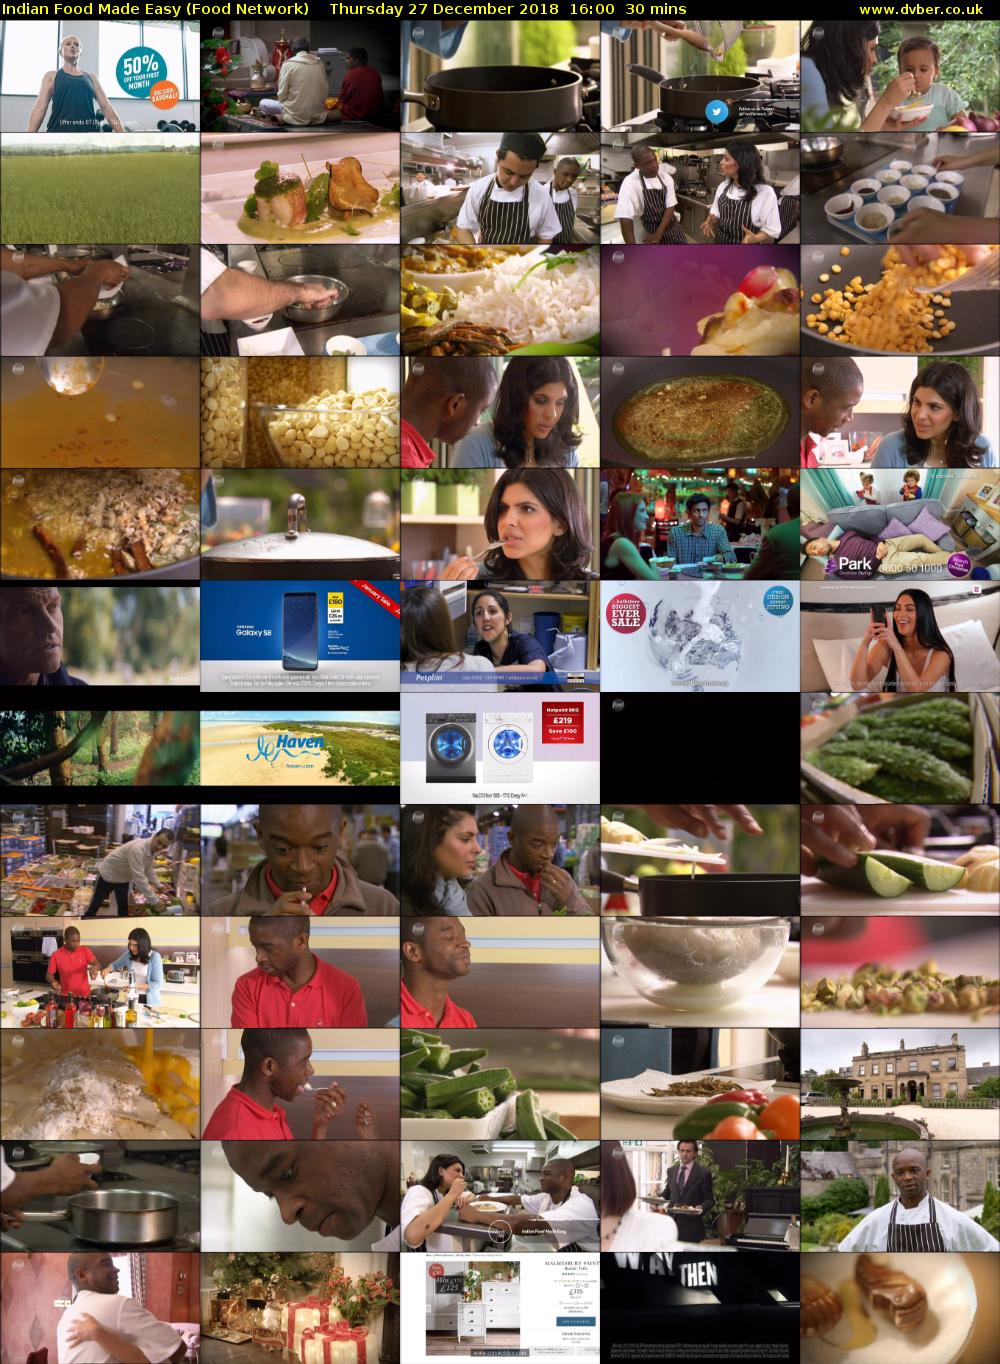 Indian Food Made Easy (Food Network) Thursday 27 December 2018 16:00 - 16:30